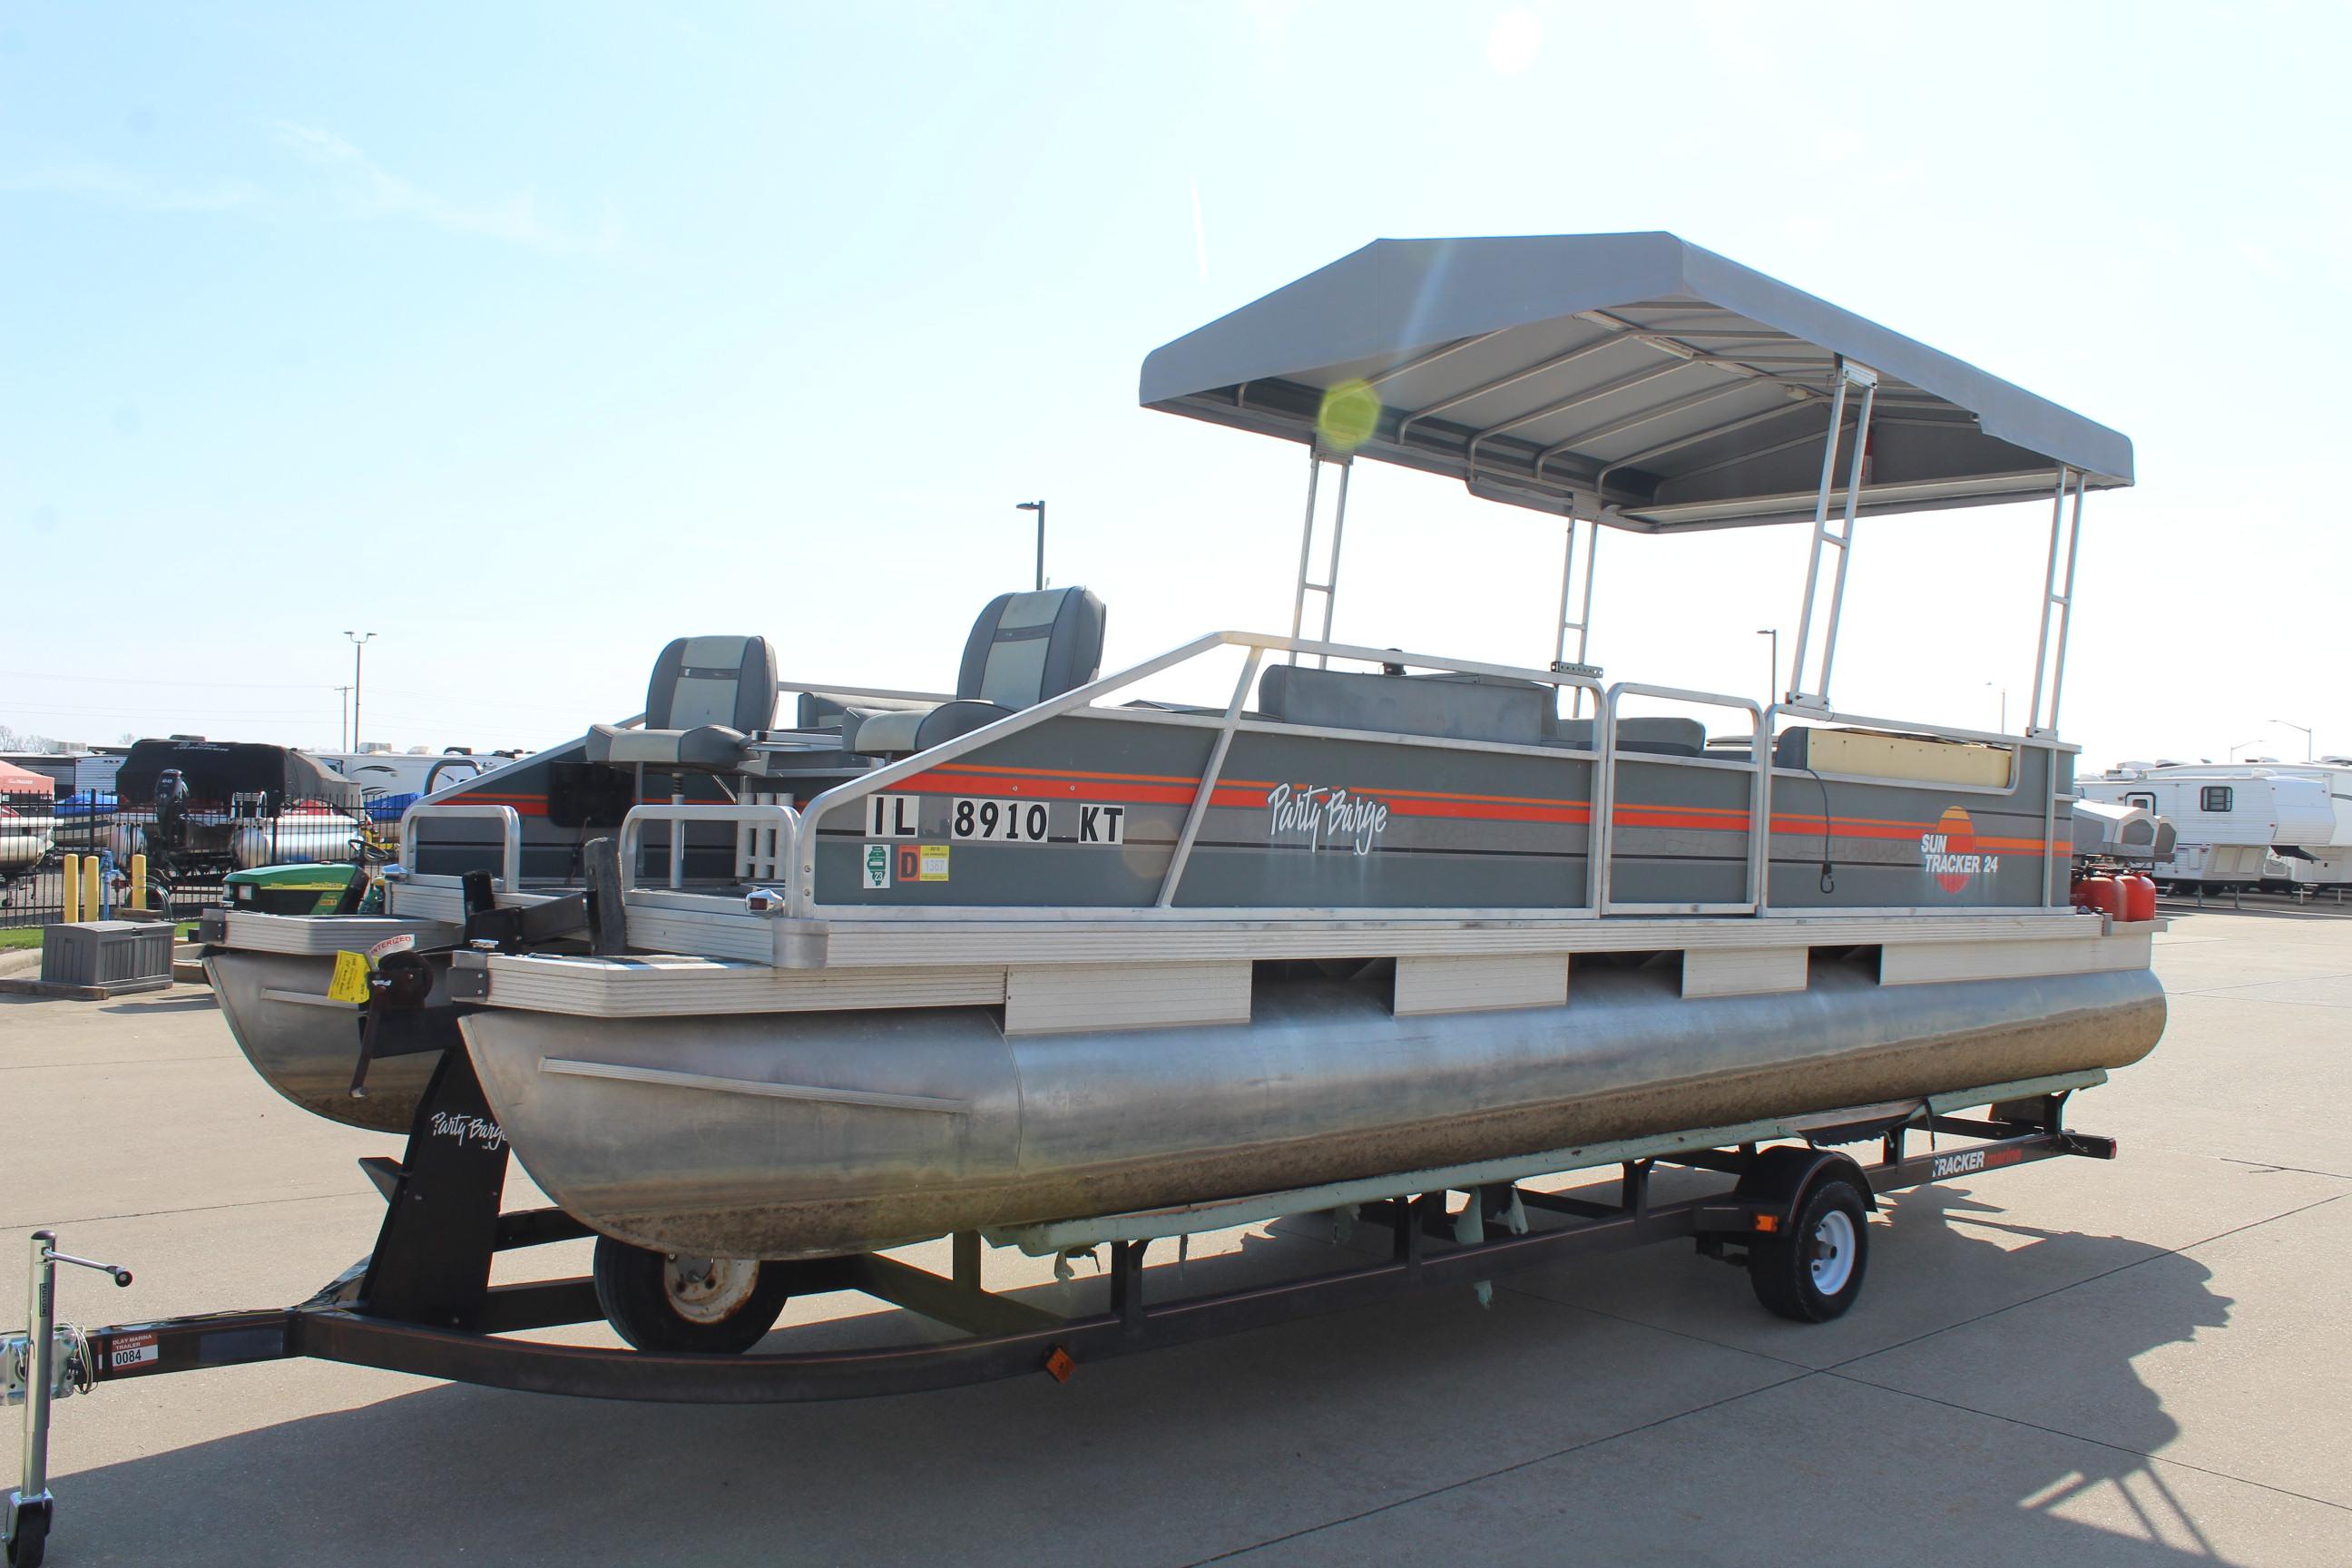 1987 Sun Tracker 24 Party Barge